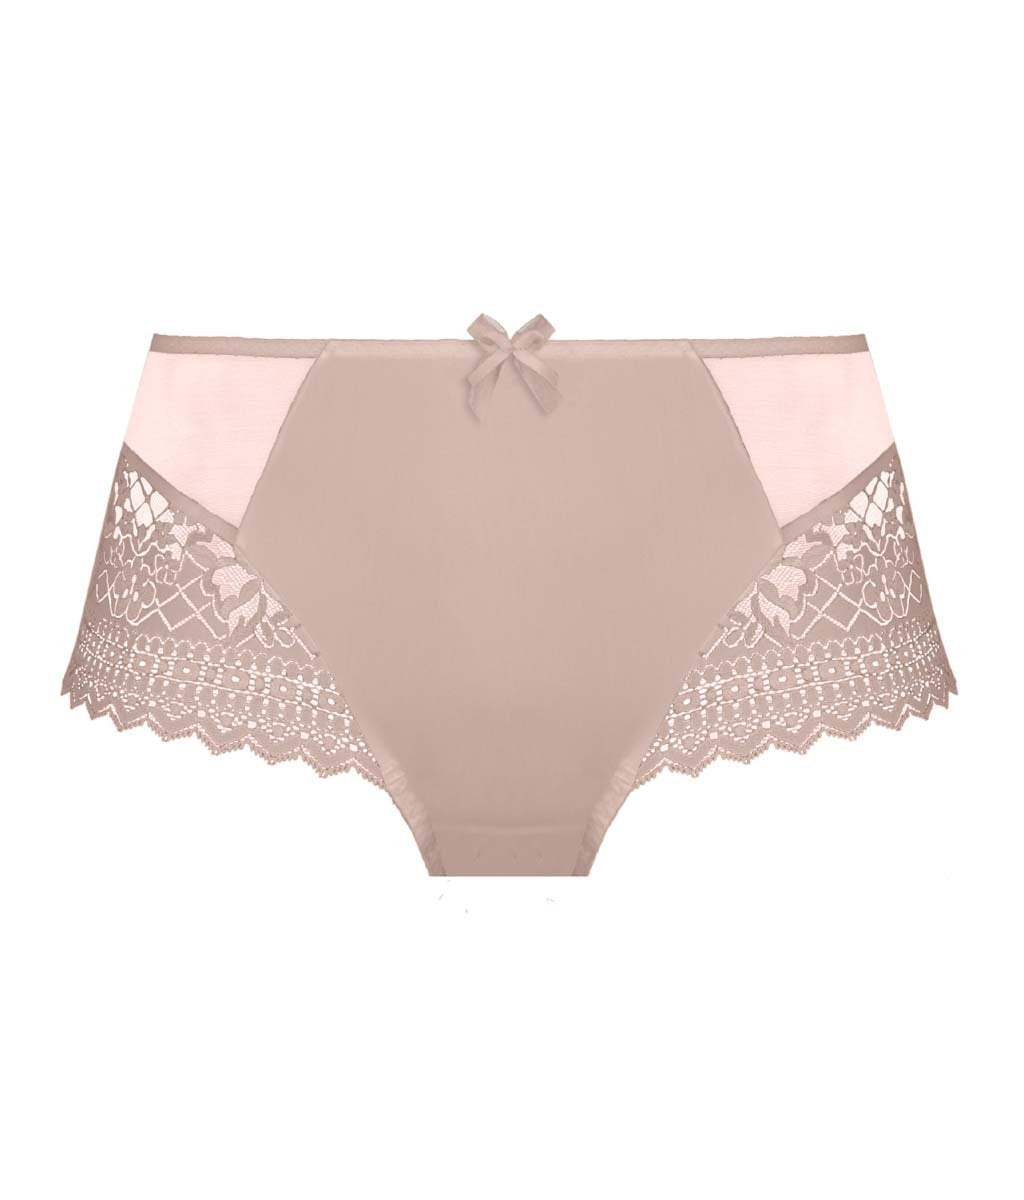 Empreinte 'Melody' (Gold) Full Brief - Sandra Dee - Product Shot - Front